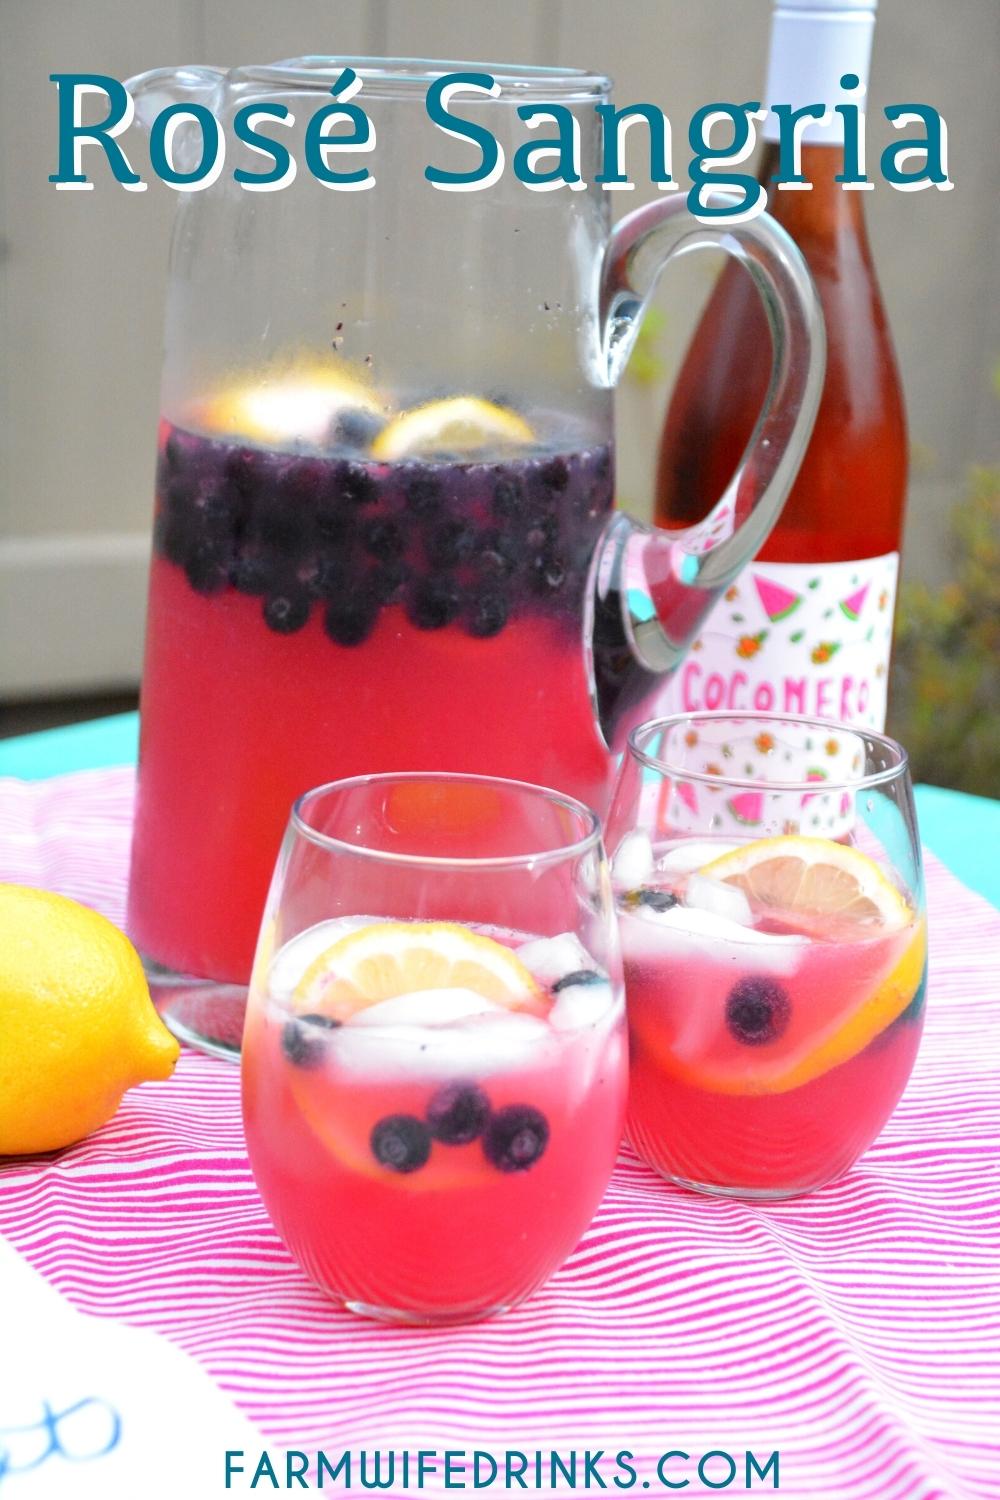 Rosé lovers will lose their minds over this rose lemonade sangria. Pretty as a picture with blueberries and lemons in the pink wine spritzer.